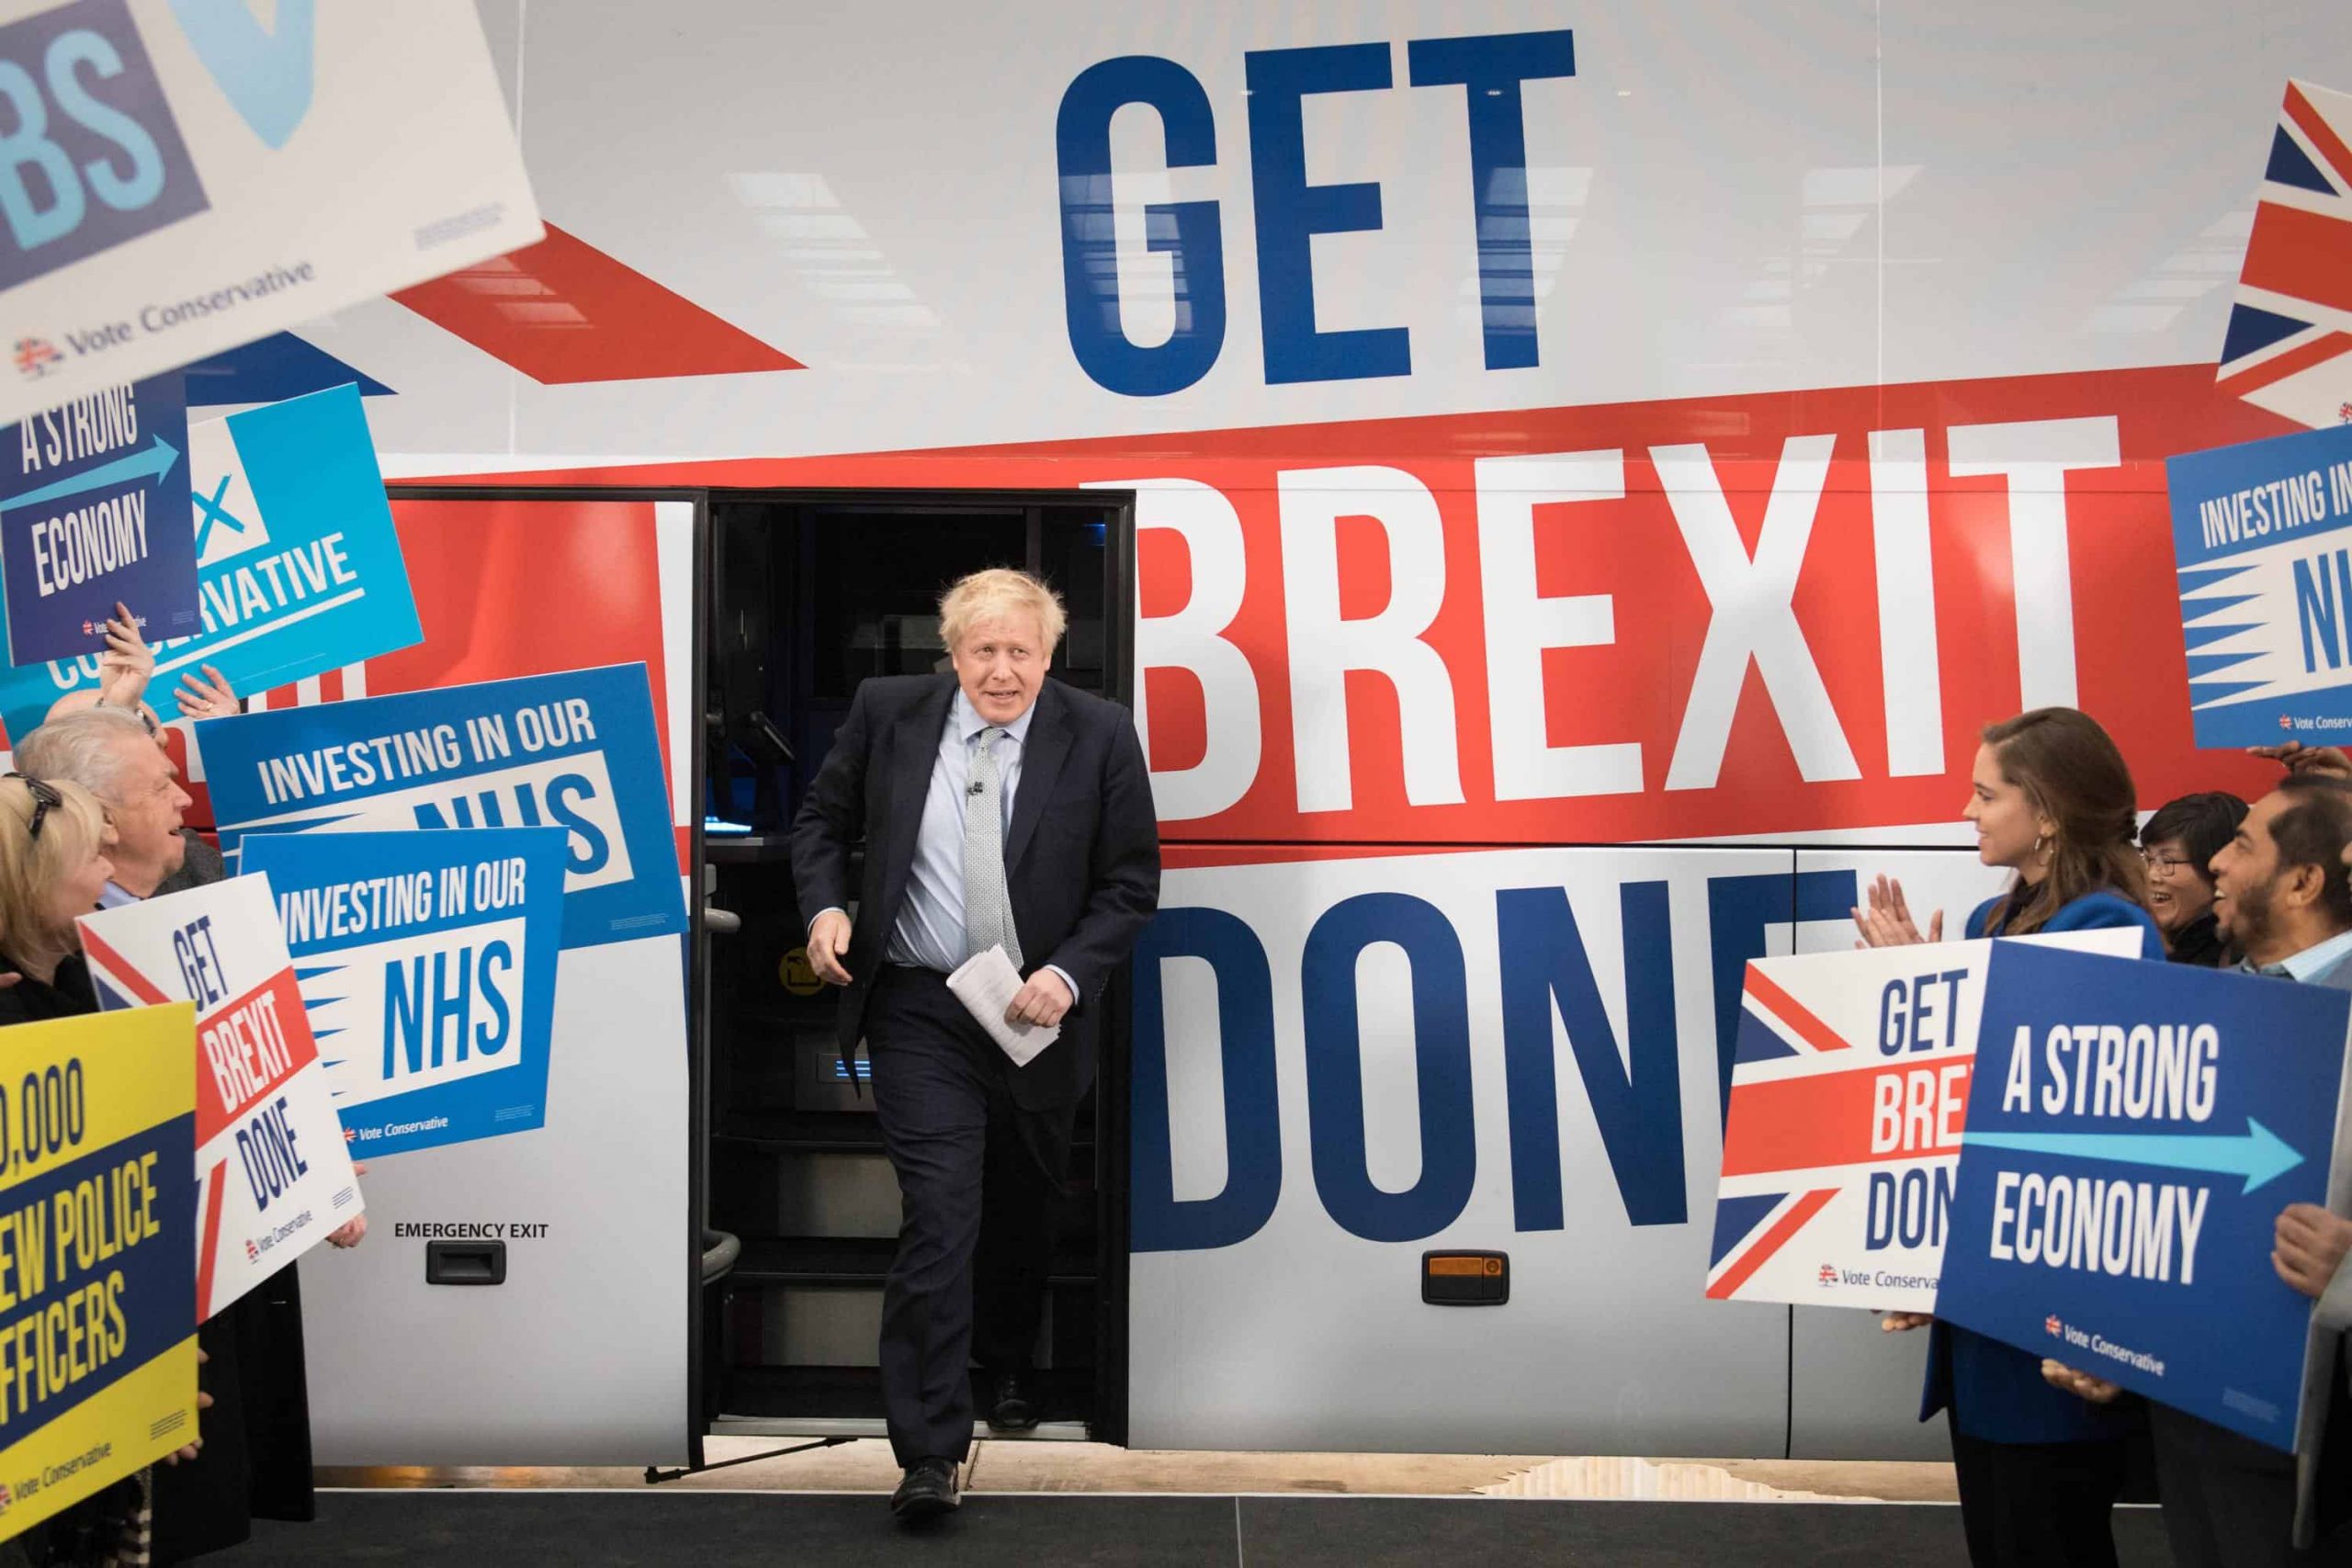 “Get Brexit Done” is the biggest manifesto con in political history